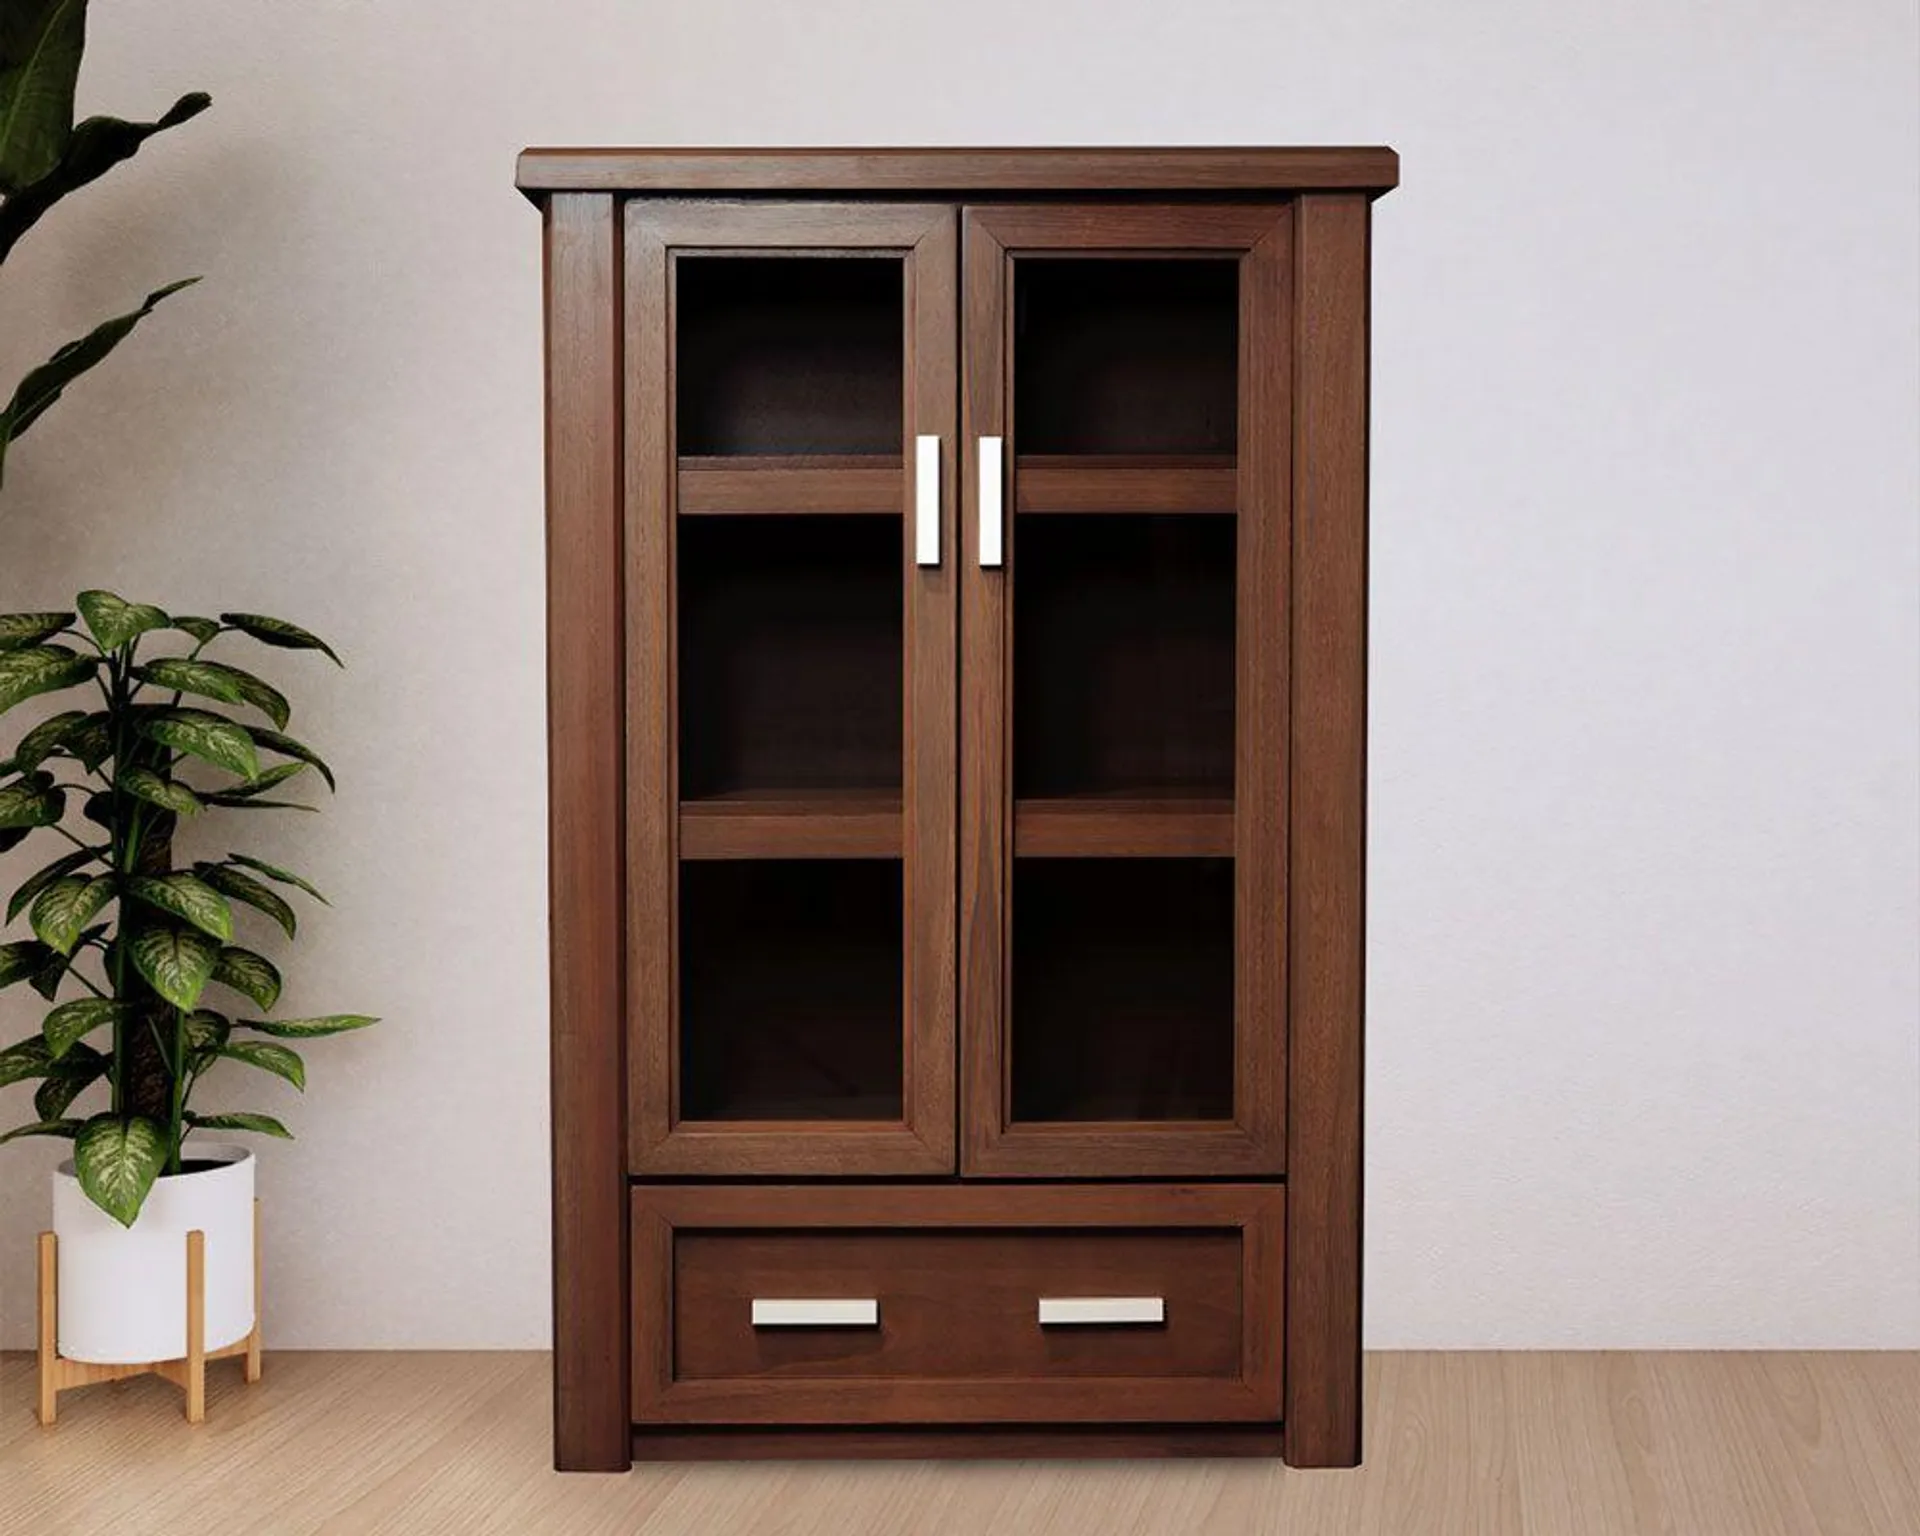 Zenandi wooden Display Cabinet with Doors and drawer